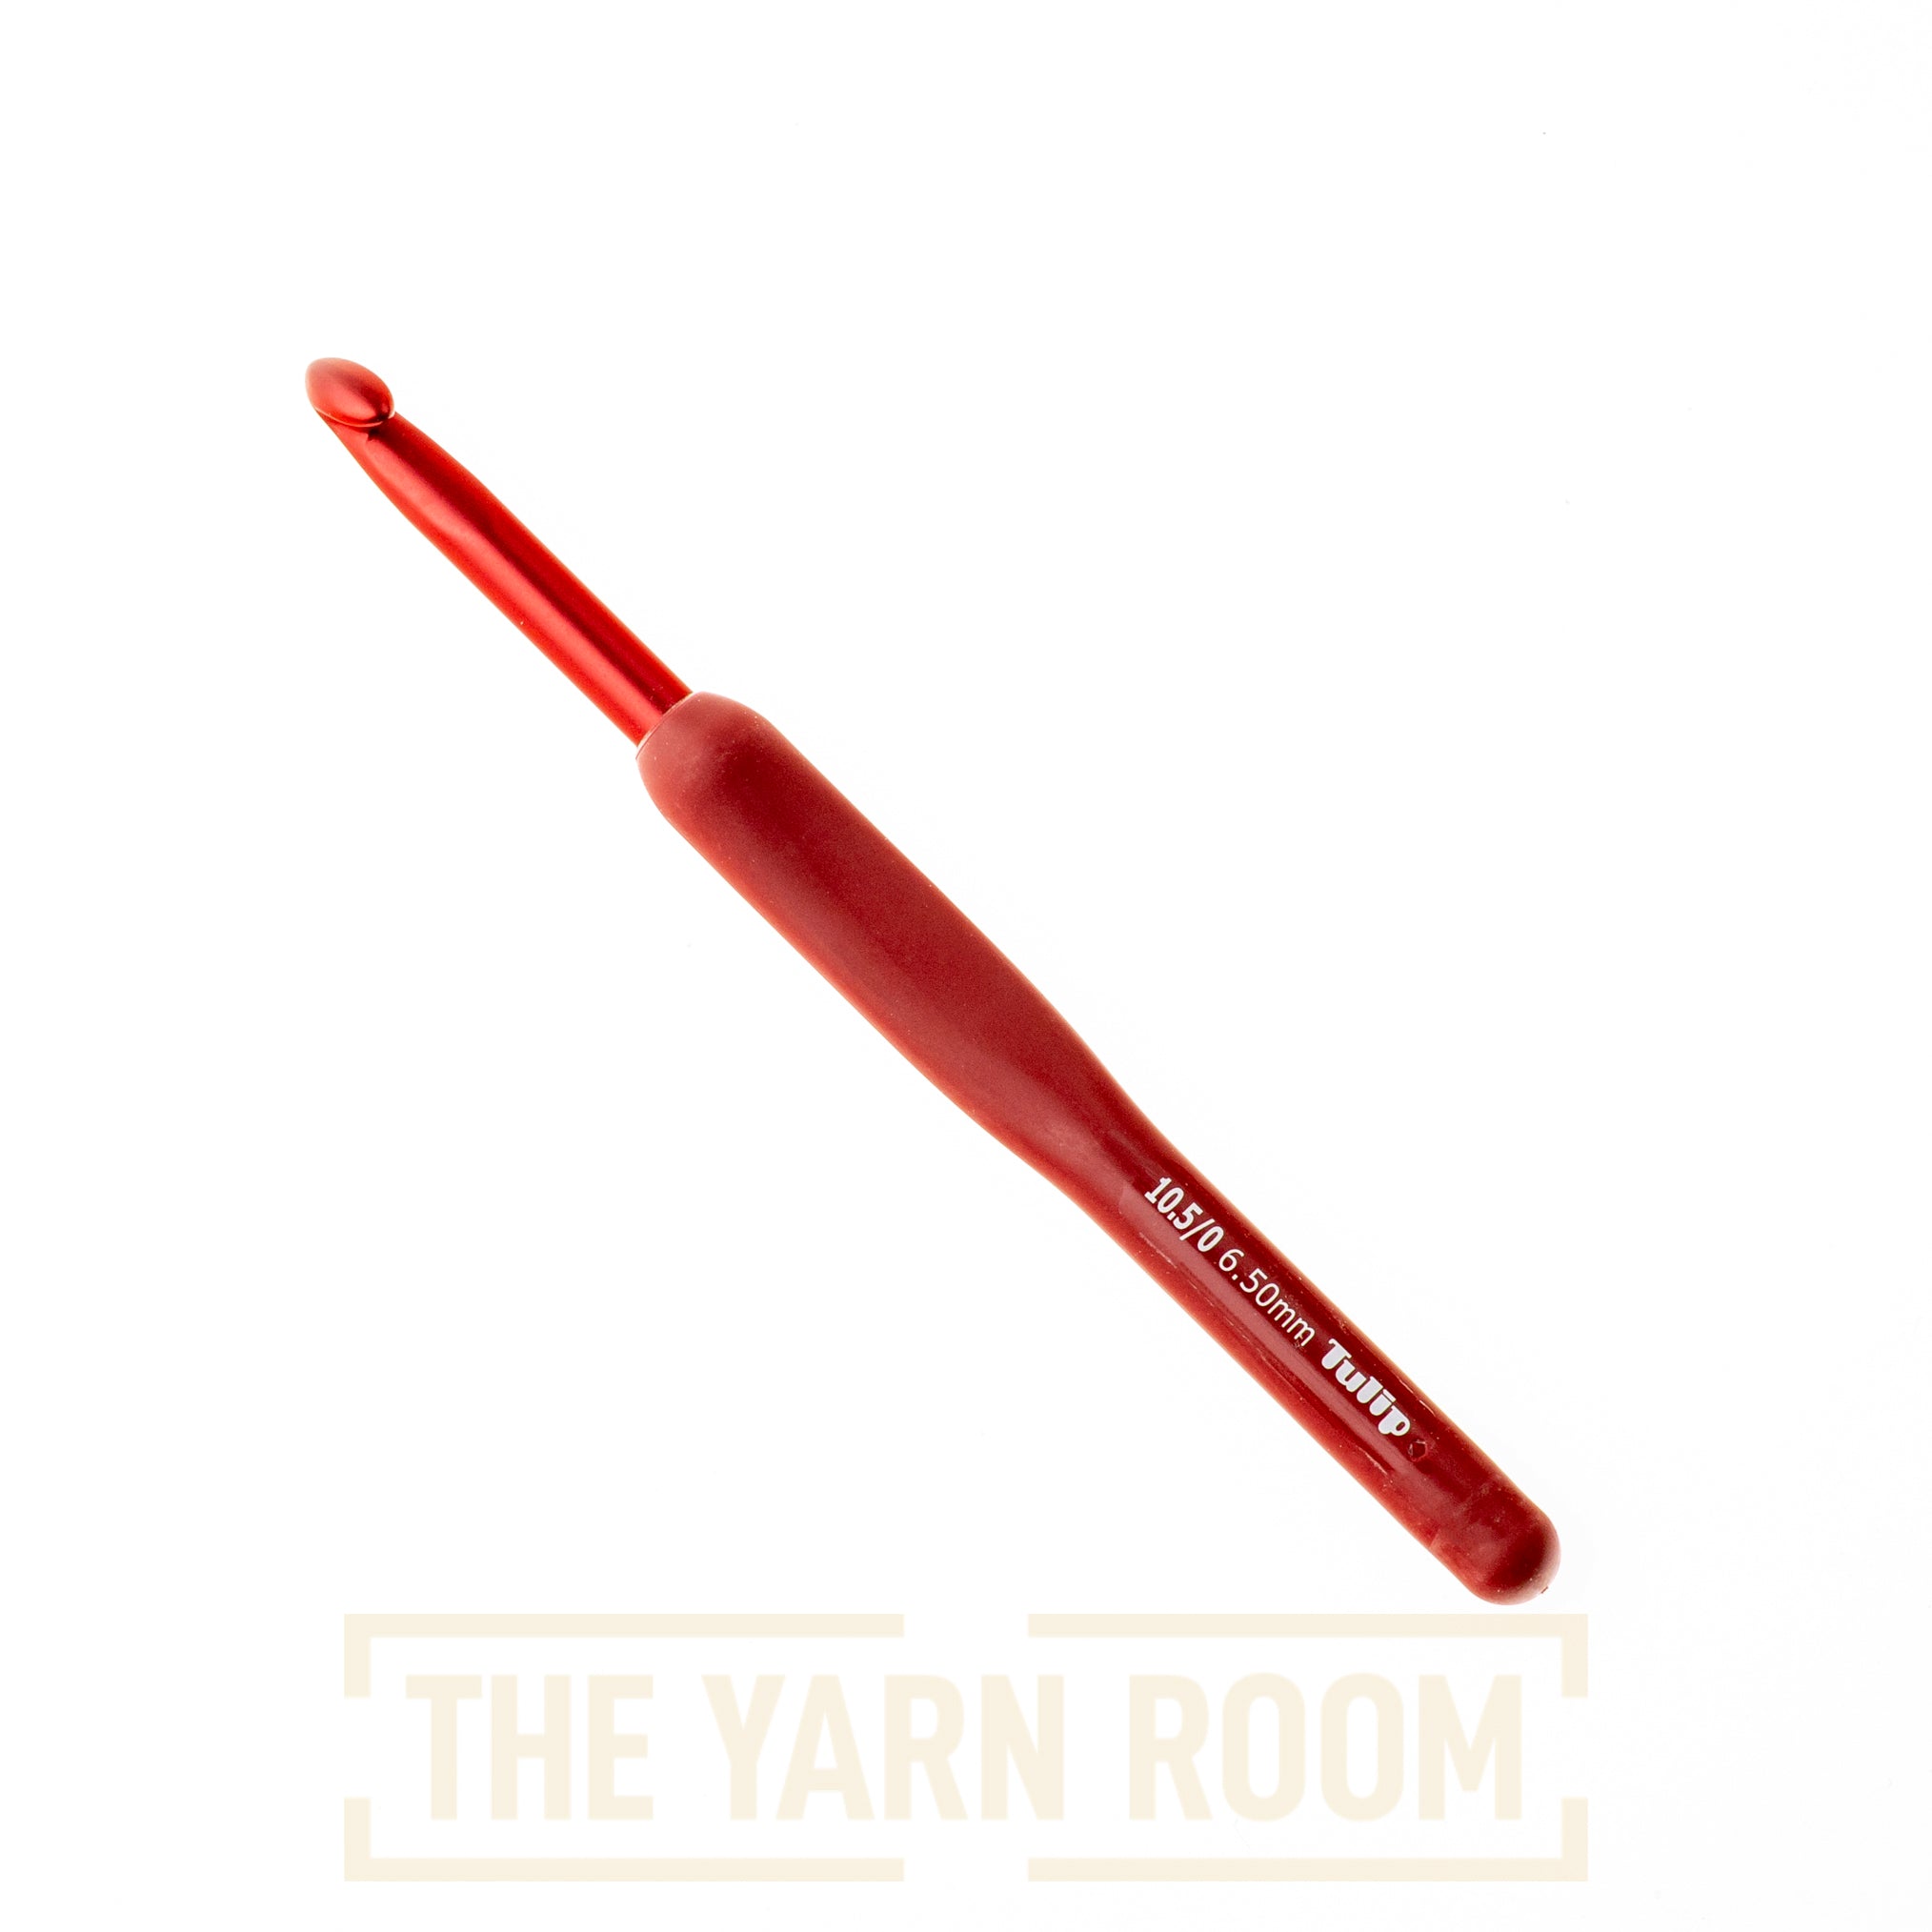 Tulip ETIMO Red Crochet Hook With Cushion Grip Assorted Sizes 